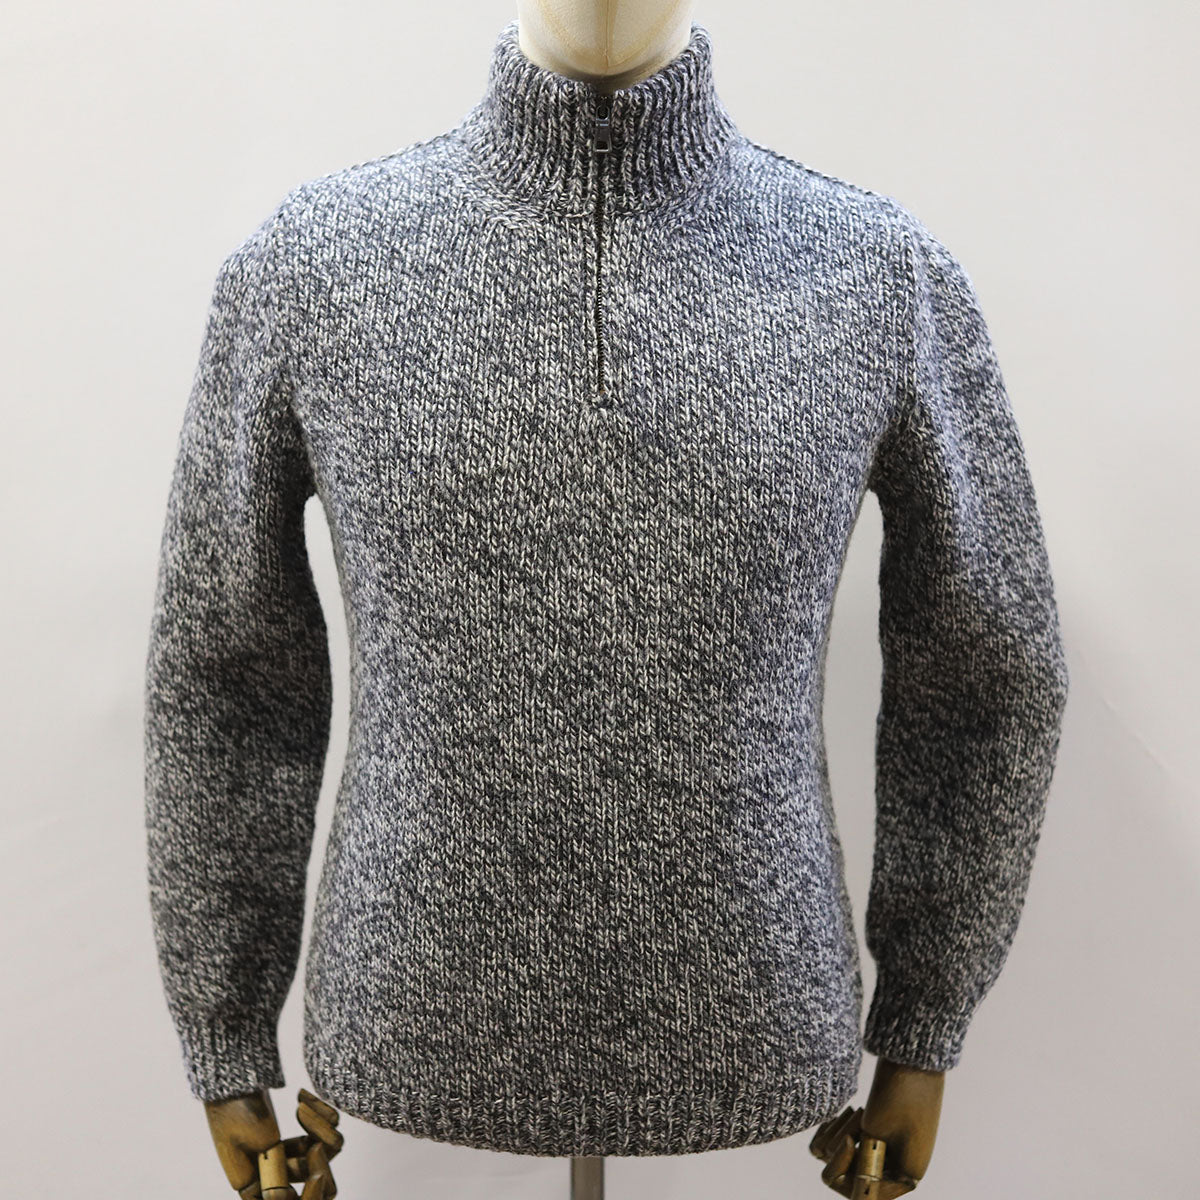 Half Zip Neck Sweather "Fisherman out of Irland"